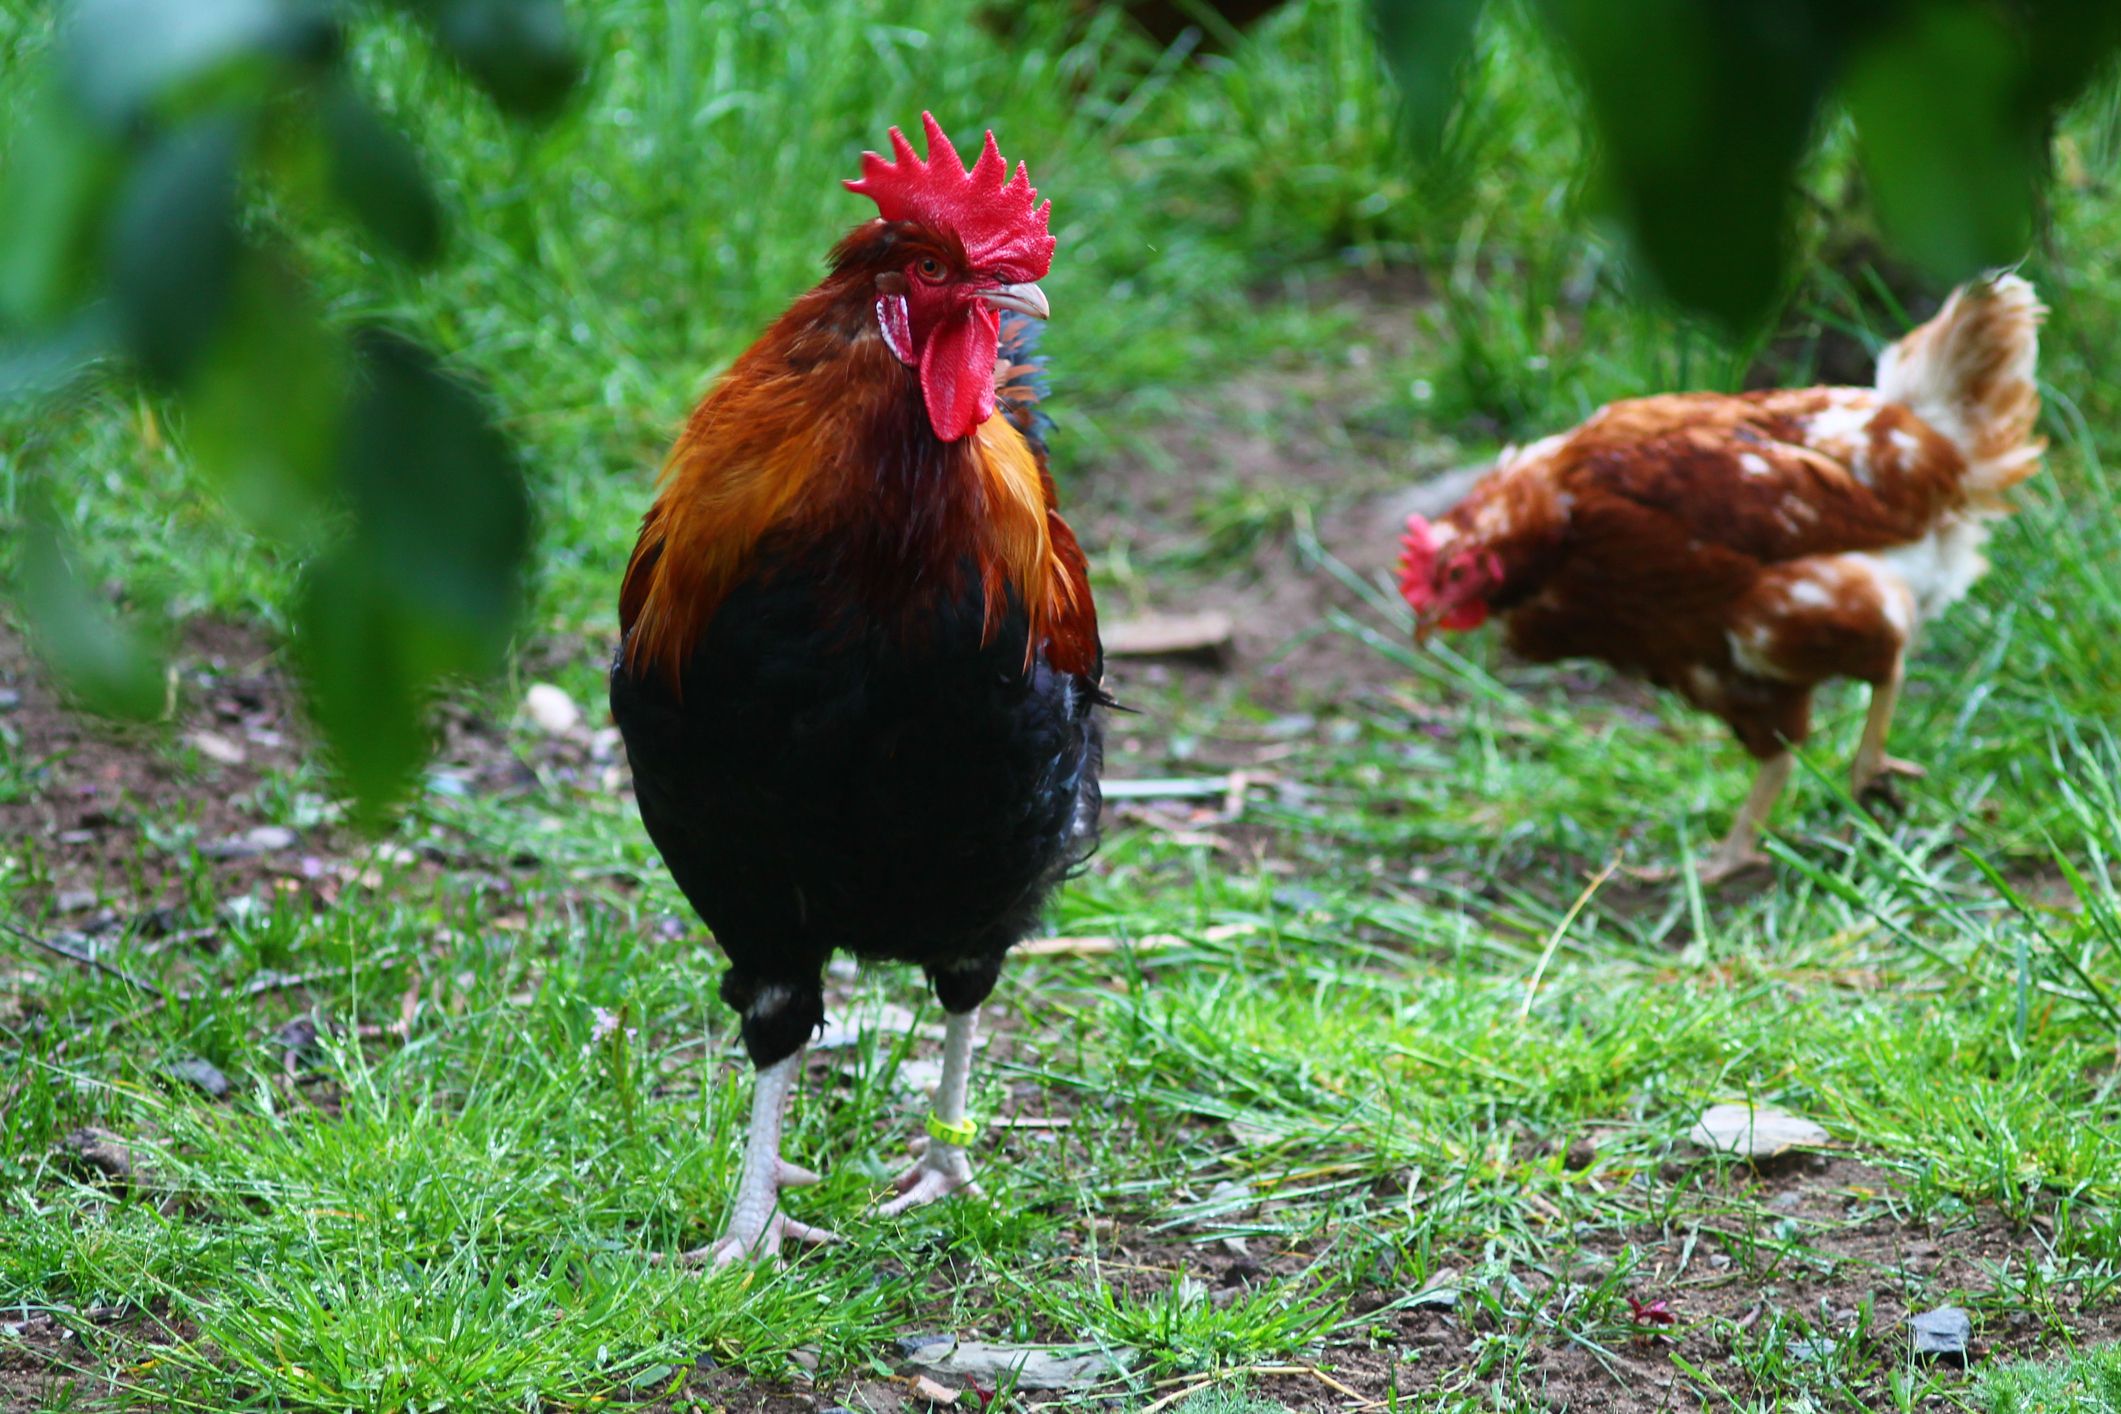 Why Is LA Banning Roosters? County Responds to Largest Cockfighting